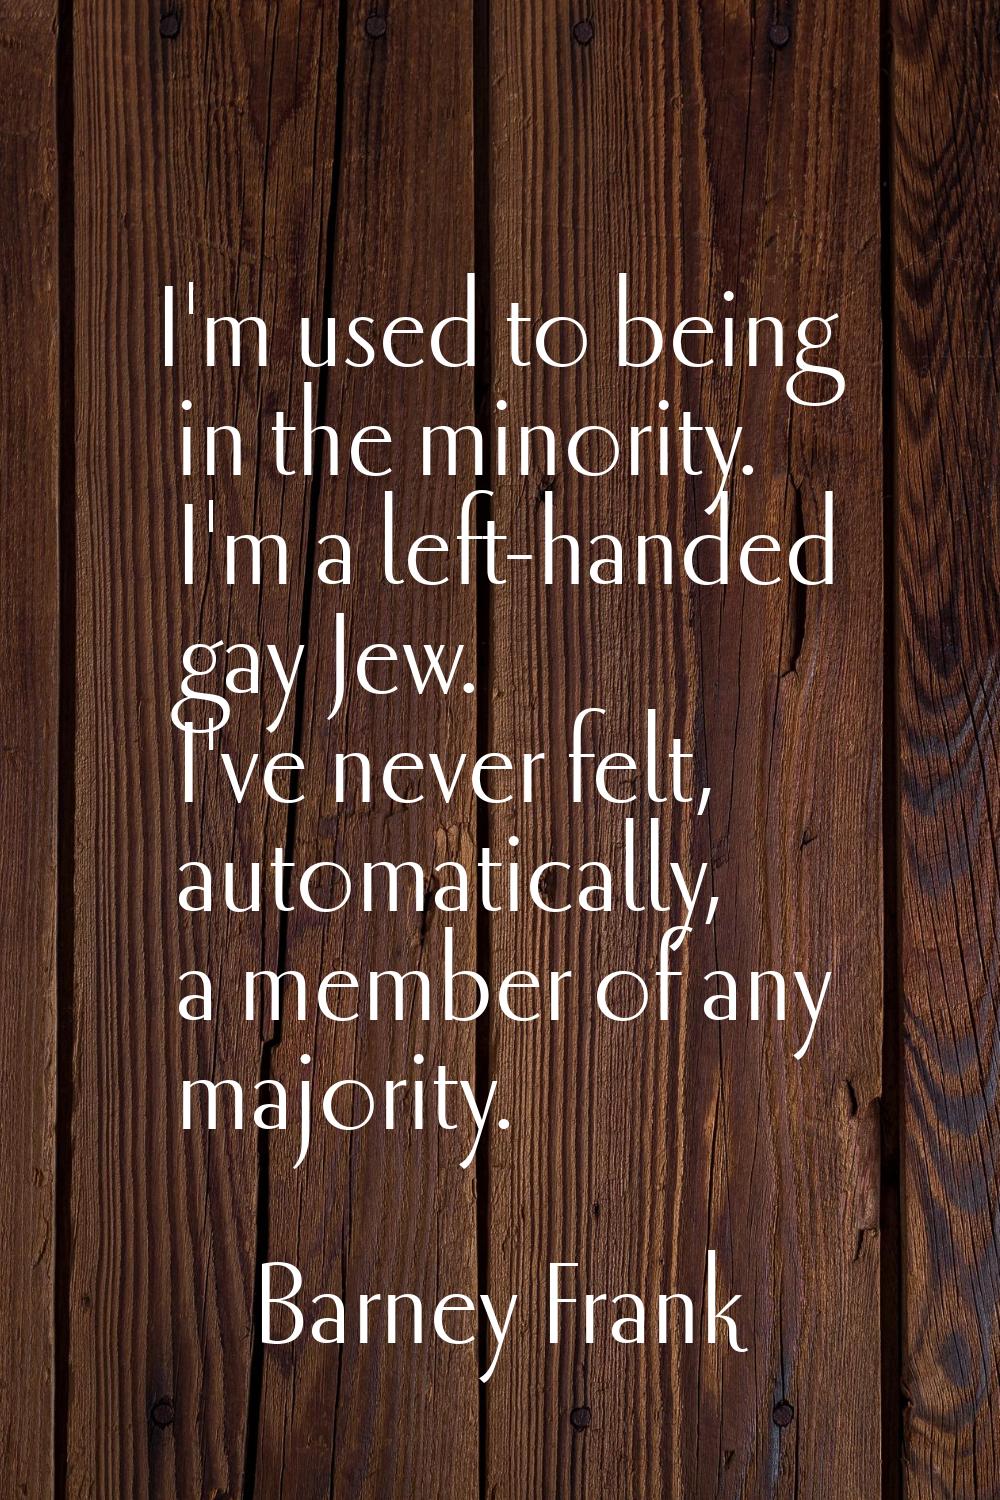 I'm used to being in the minority. I'm a left-handed gay Jew. I've never felt, automatically, a mem